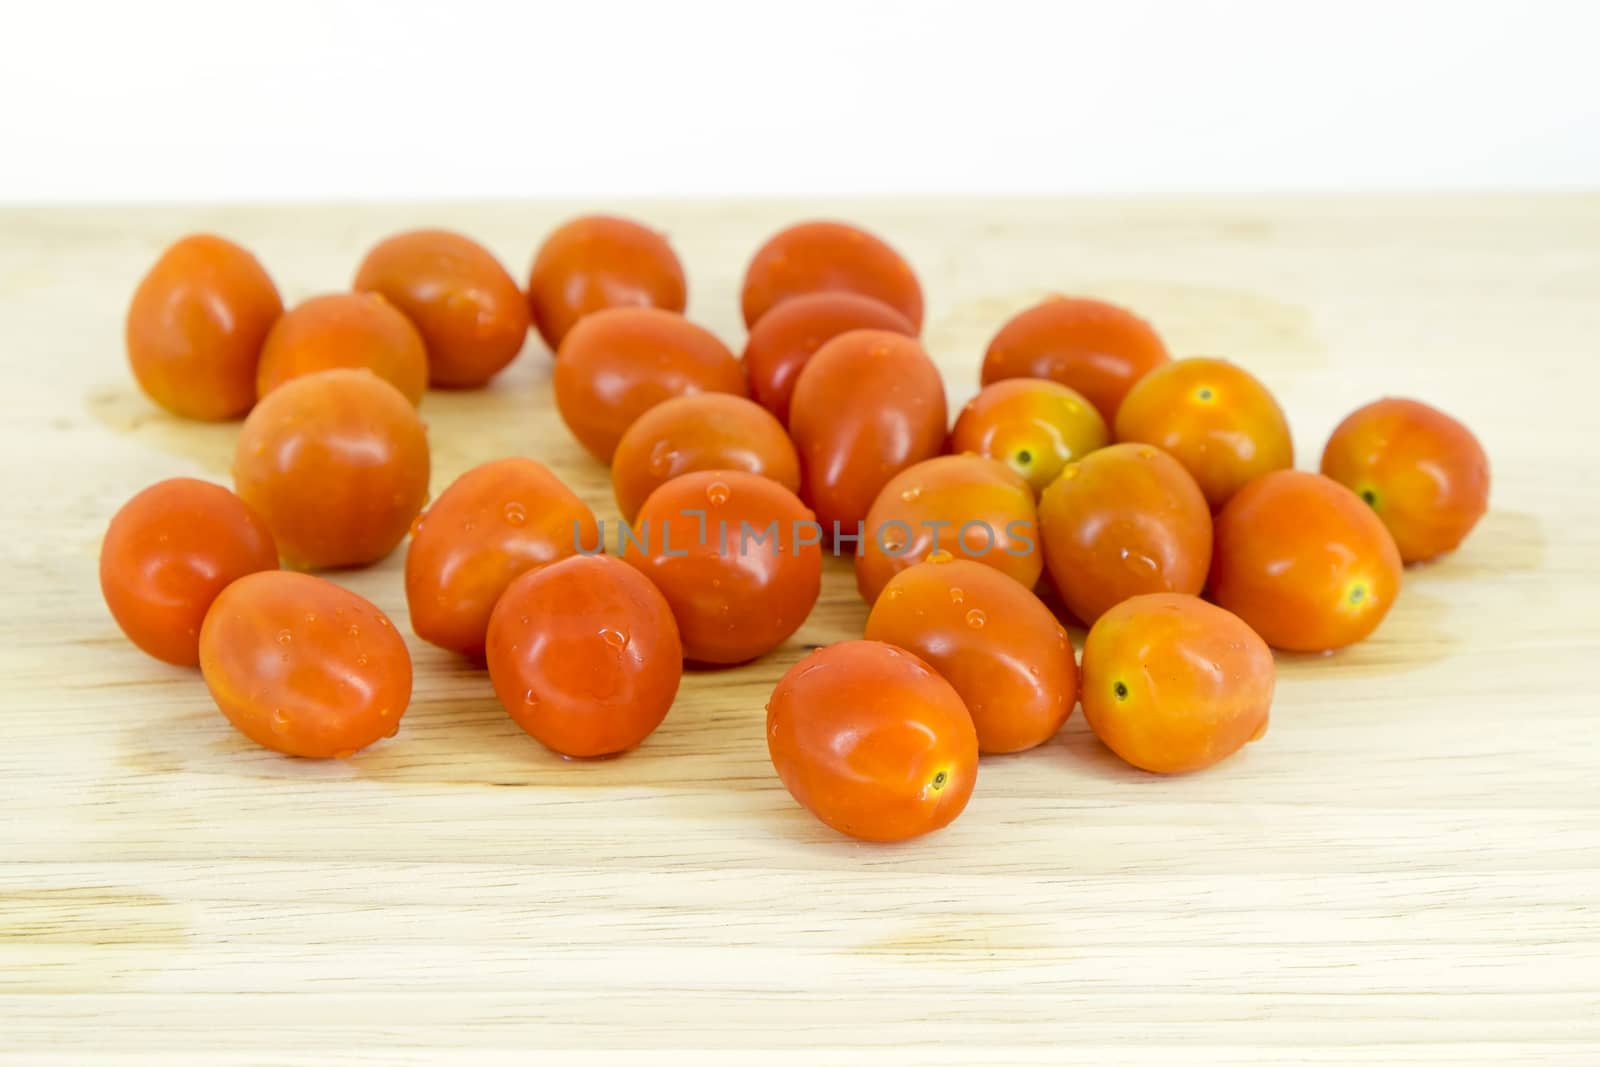 Cherry tomatoes on cutting board by art9858